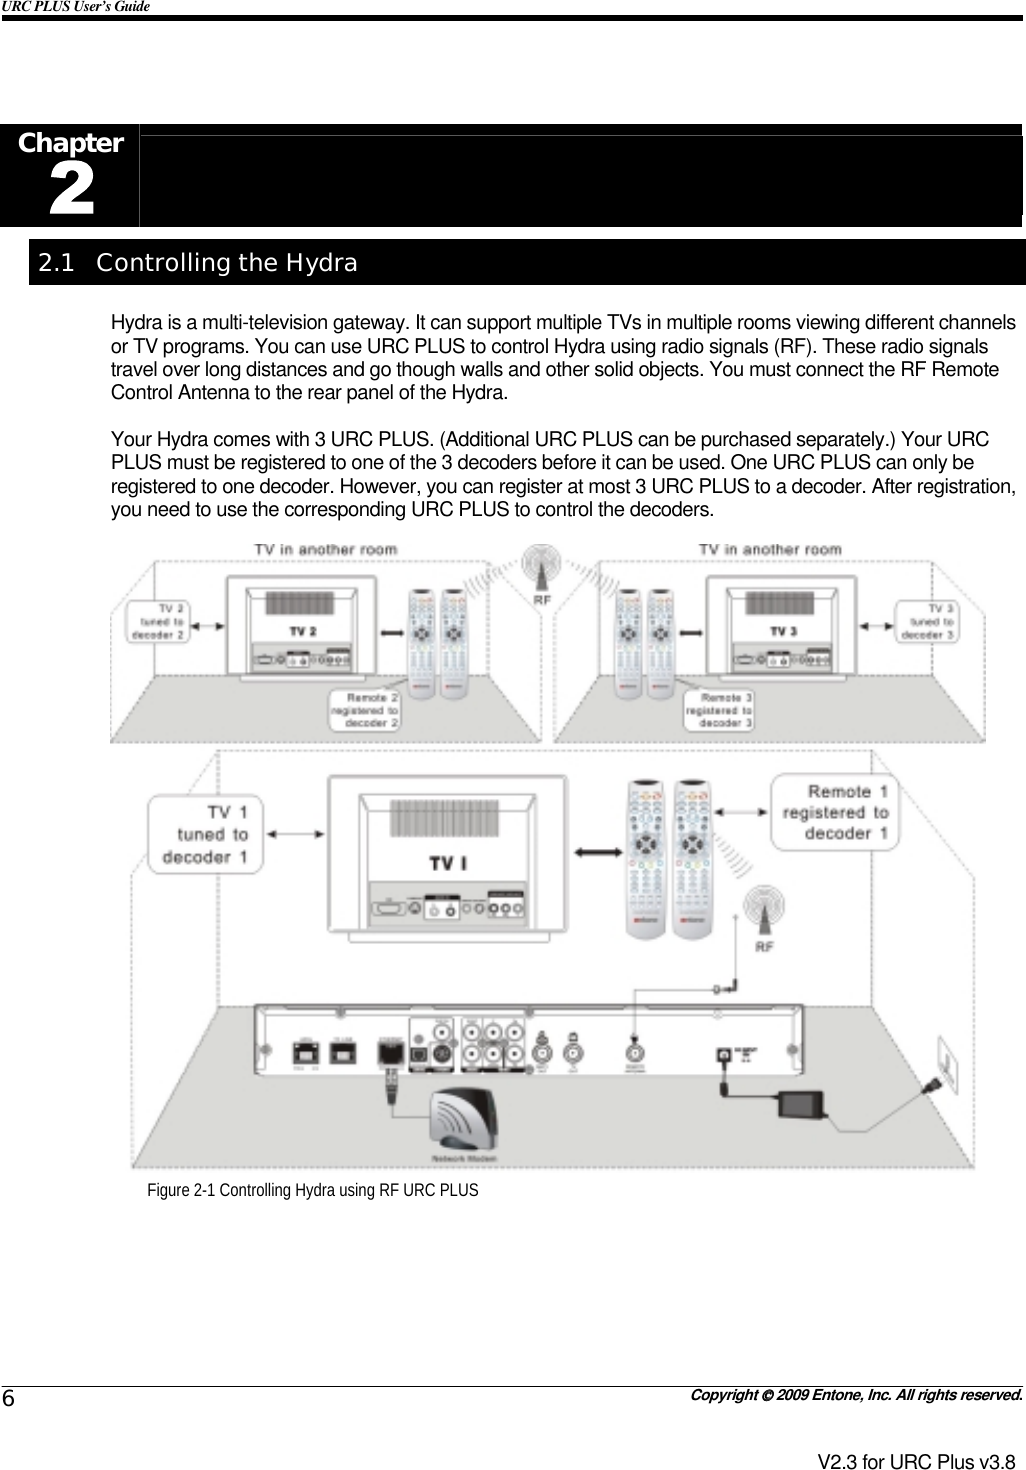 URC PLUS User’s Guide   Copyright  2009 Entone, Inc. All rights reserved. 6 V2.3 for URC Plus v3.8  Chapter 2.1  Controlling the Hydra Hydra is a multi-television gateway. It can support multiple TVs in multiple rooms viewing different channels or TV programs. You can use URC PLUS to control Hydra using radio signals (RF). These radio signals travel over long distances and go though walls and other solid objects. You must connect the RF Remote Control Antenna to the rear panel of the Hydra.  Your Hydra comes with 3 URC PLUS. (Additional URC PLUS can be purchased separately.) Your URC PLUS must be registered to one of the 3 decoders before it can be used. One URC PLUS can only be registered to one decoder. However, you can register at most 3 URC PLUS to a decoder. After registration, you need to use the corresponding URC PLUS to control the decoders.   Figure 2-1 Controlling Hydra using RF URC PLUS  